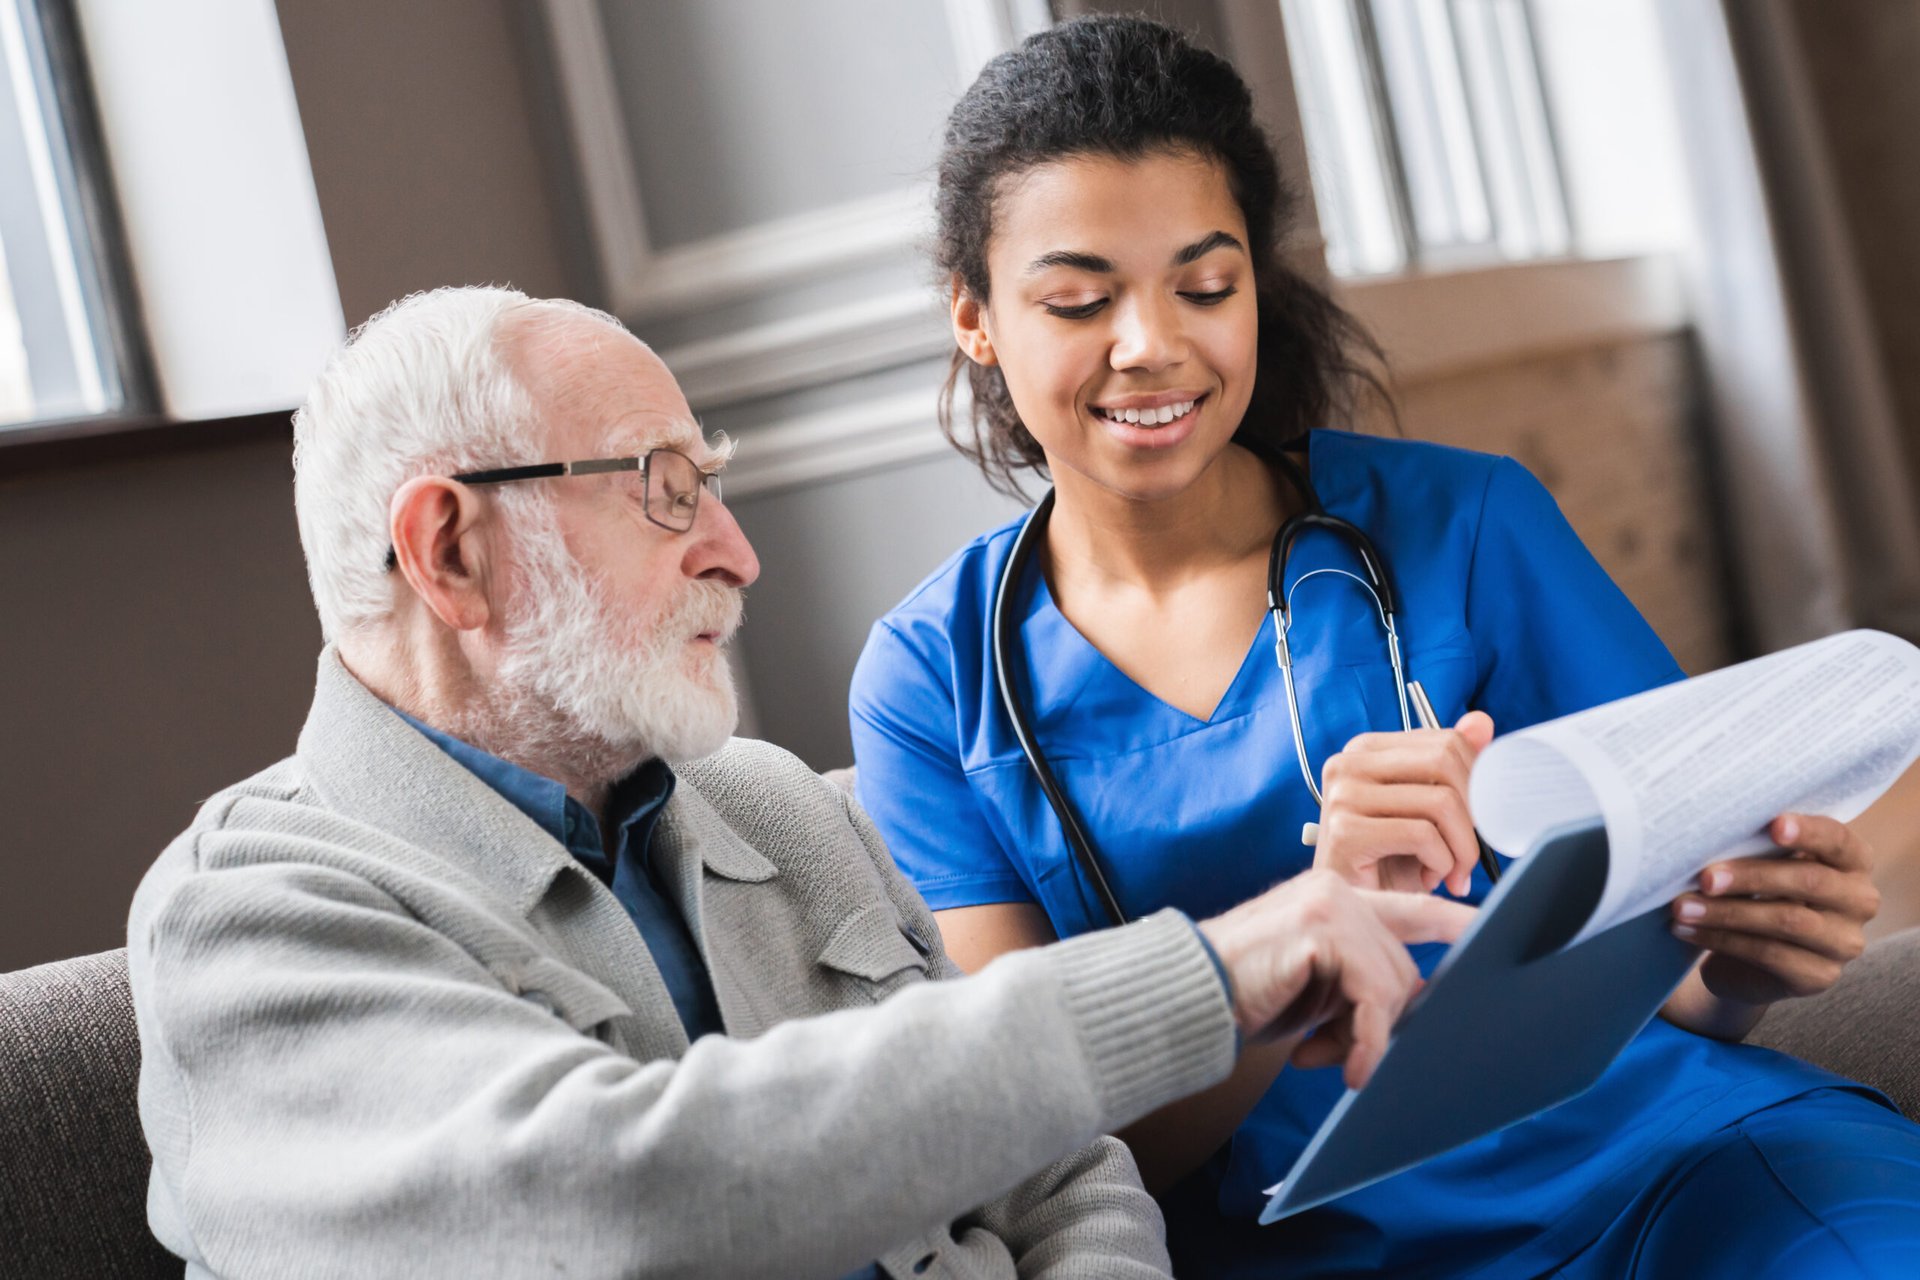 Nurse helping a senior fill out medical paperwork